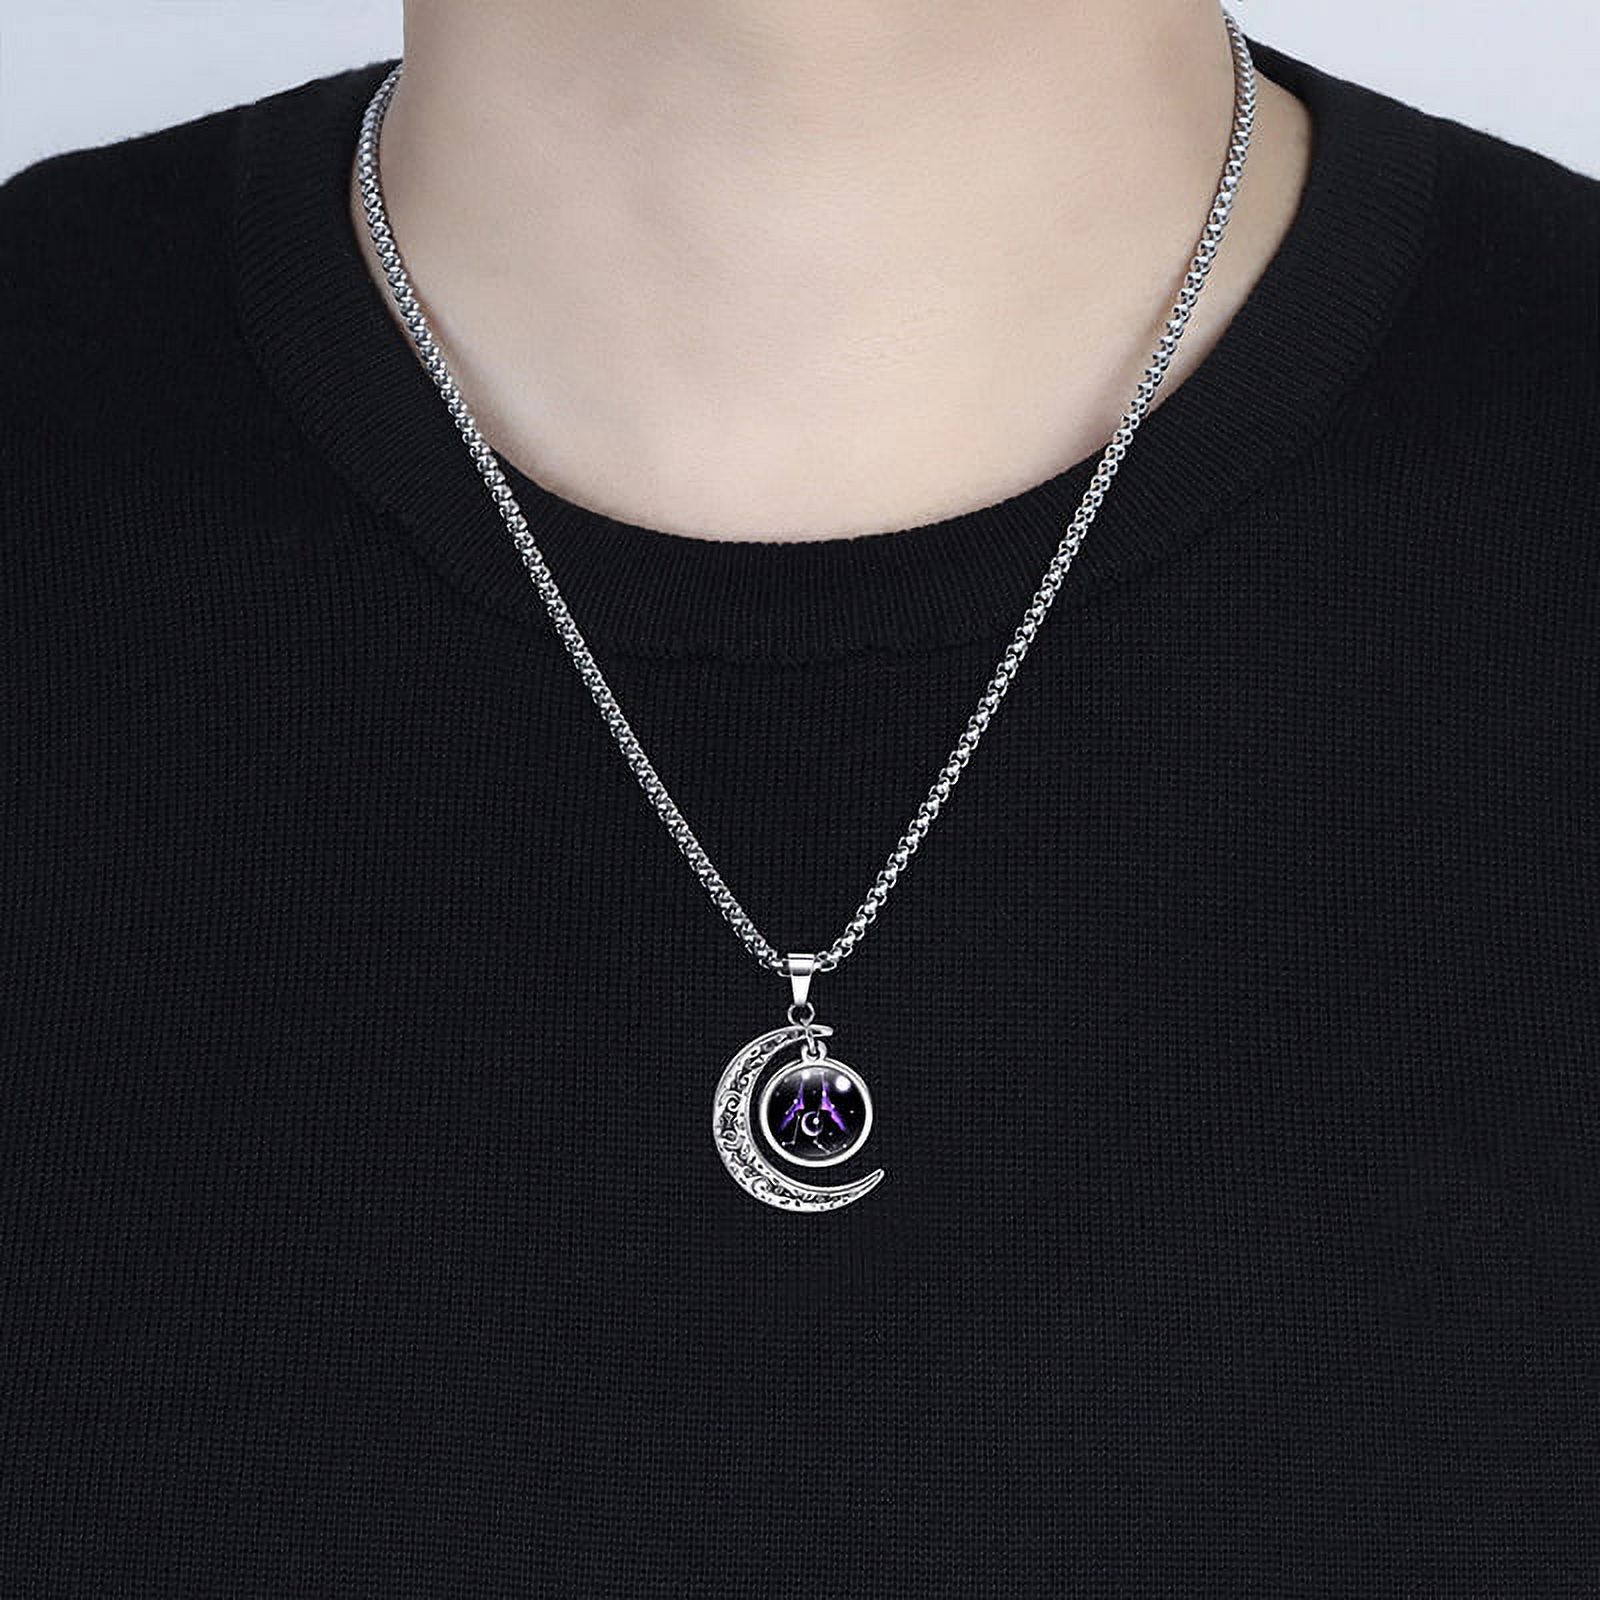 JUSTUP Wekity Stainless Steel Crescent Moon 12 Constellation Zodiac Sign Luminous Pendant Necklace Glow in The Dark,Leo - image 2 of 4